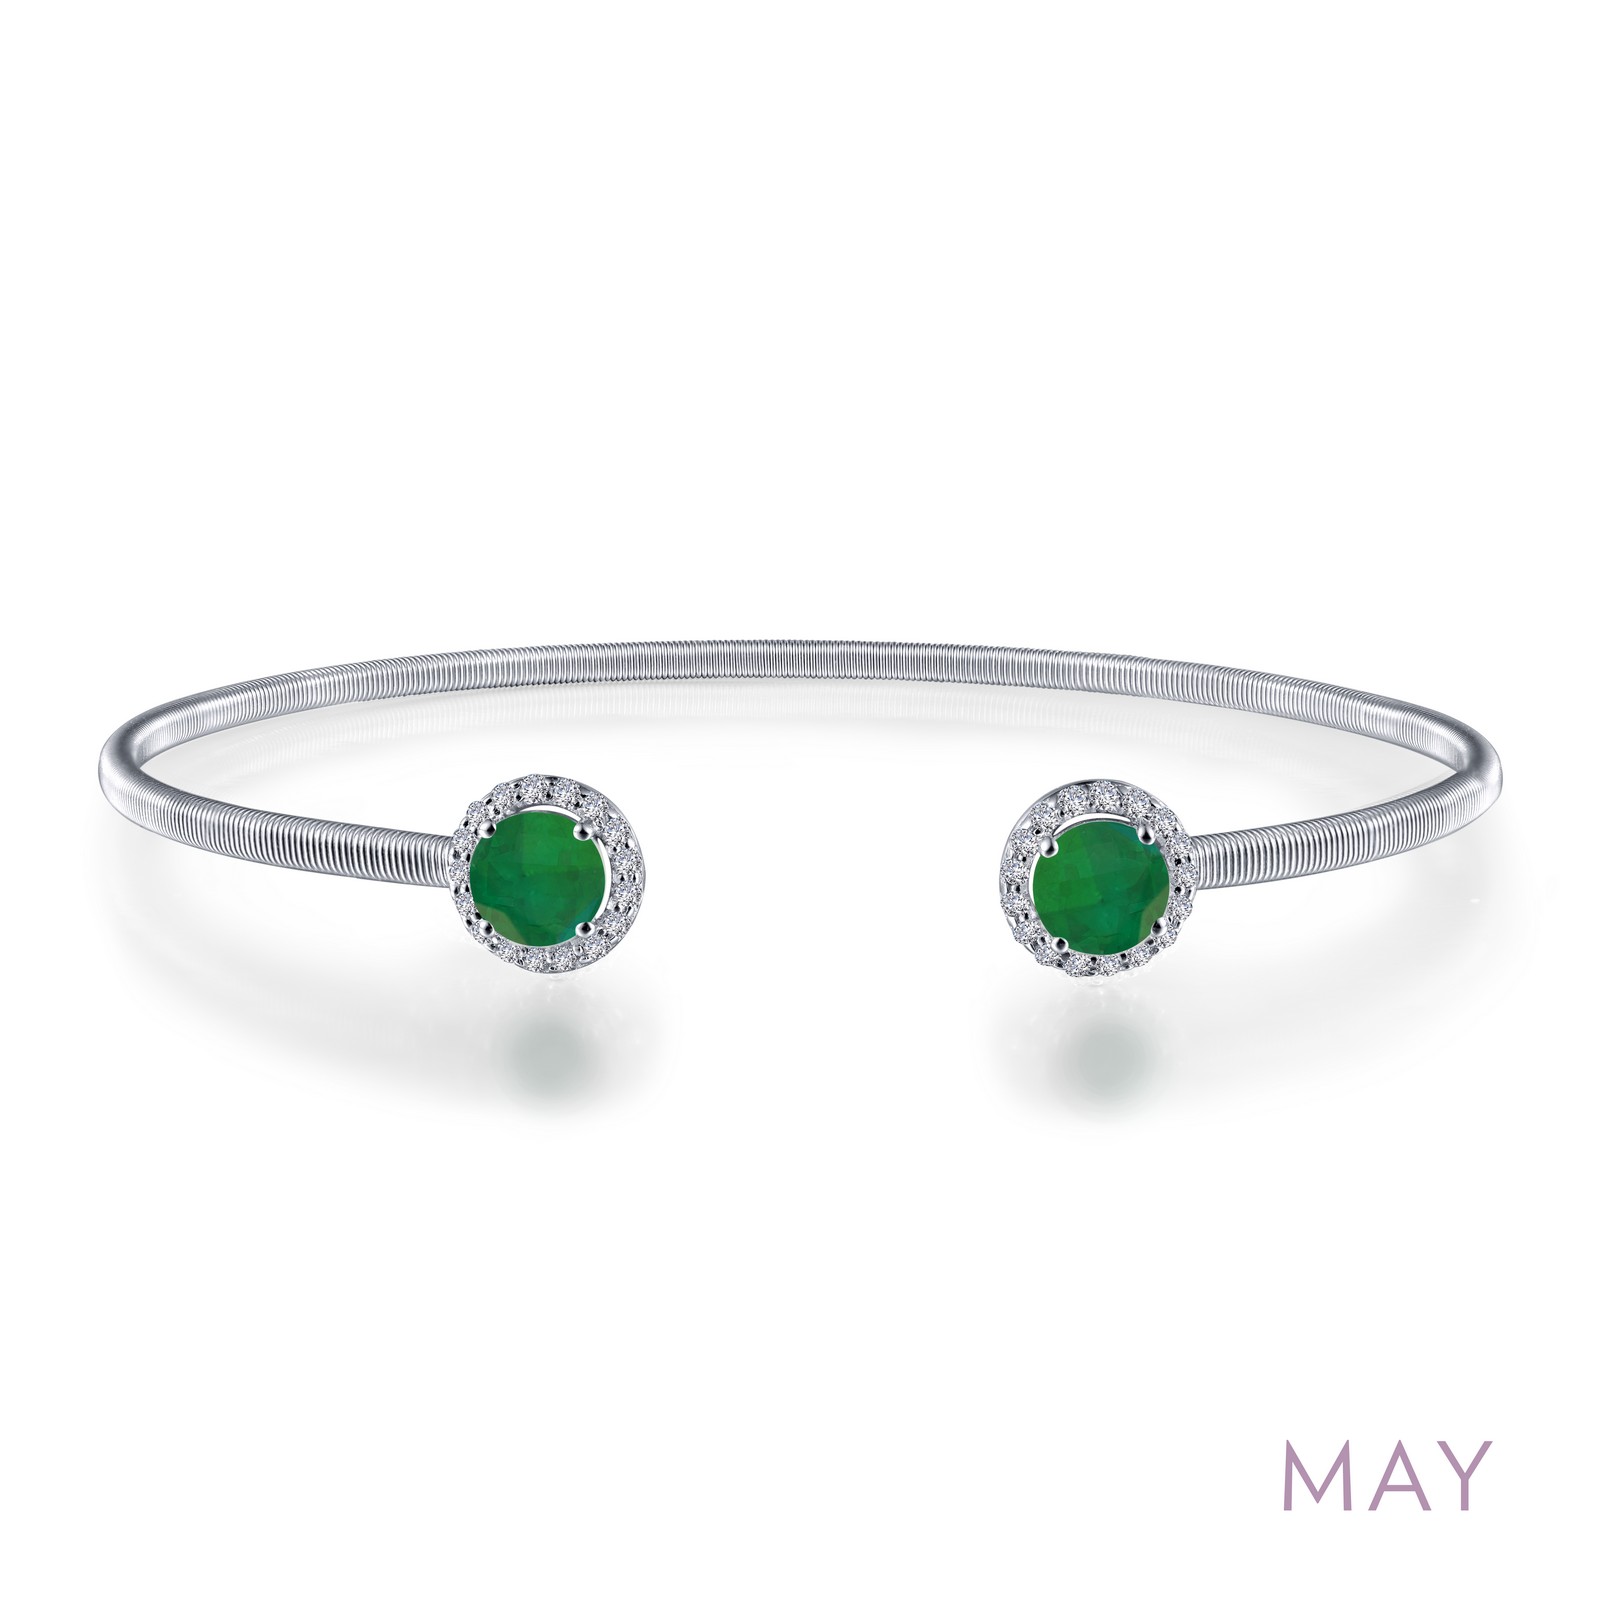 May Birthstone Bracelet - May - Emerald. Adorn yourself with Lafonn's birthstone jewelry. This flexible stackable open cuff halo bangle bracelet is set with Lafonn's signature Lassaire simulated diamonds and simulated emeralds. Bracelet is in sterling silver bonded with platinum. 